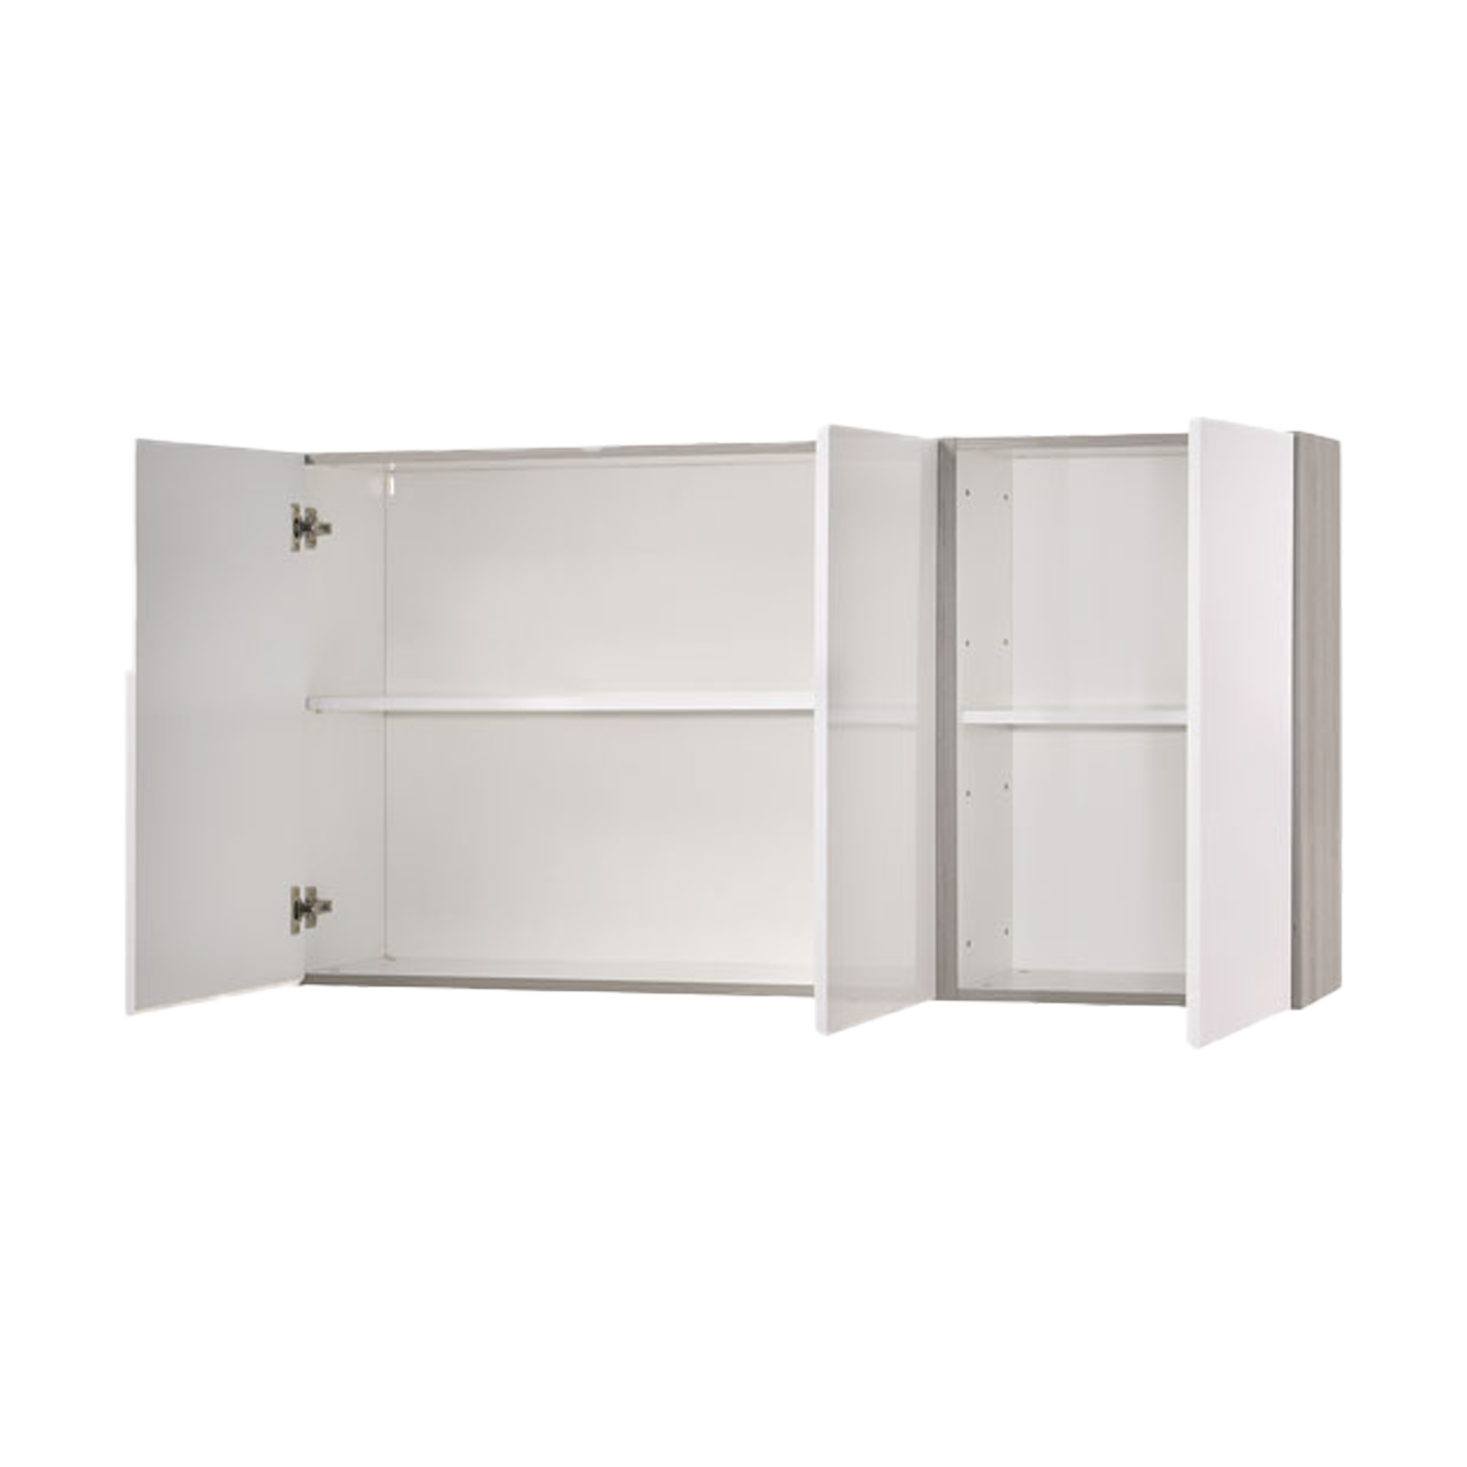 Picture of DAVINCI 4.5FT KITCHEN CABINET  (WALL UNIT) WITH HIGH GLOSS WHITE -  GREY OAK